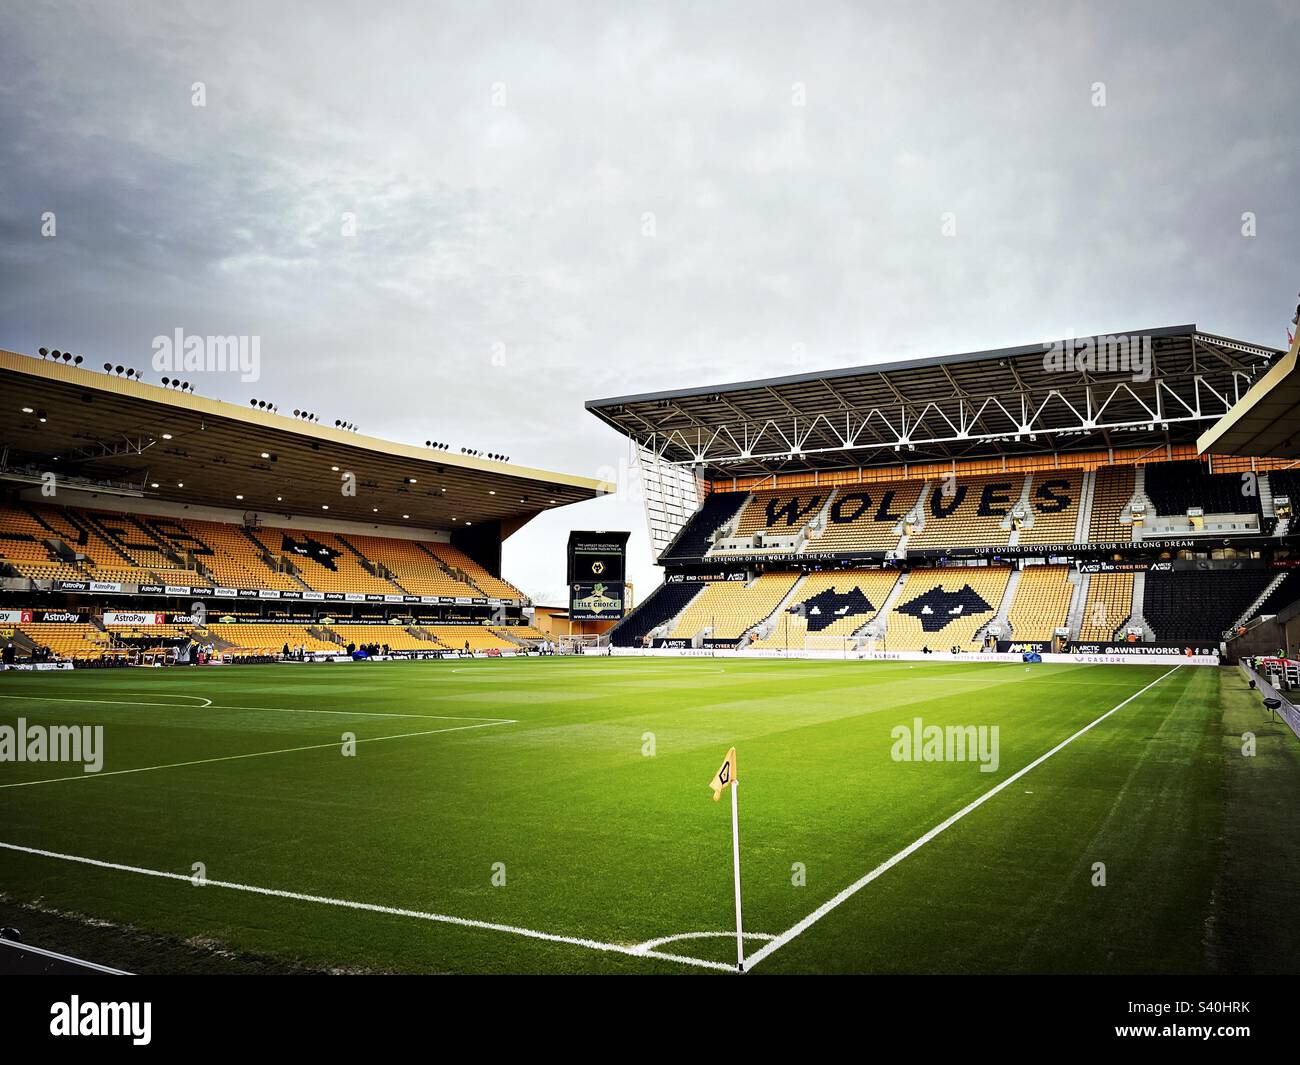 A general view of the football pitch at Molineaux stadium, home to Wolverhampton Wanderers. Wolves currently play in the English Premier League. Stock Photo